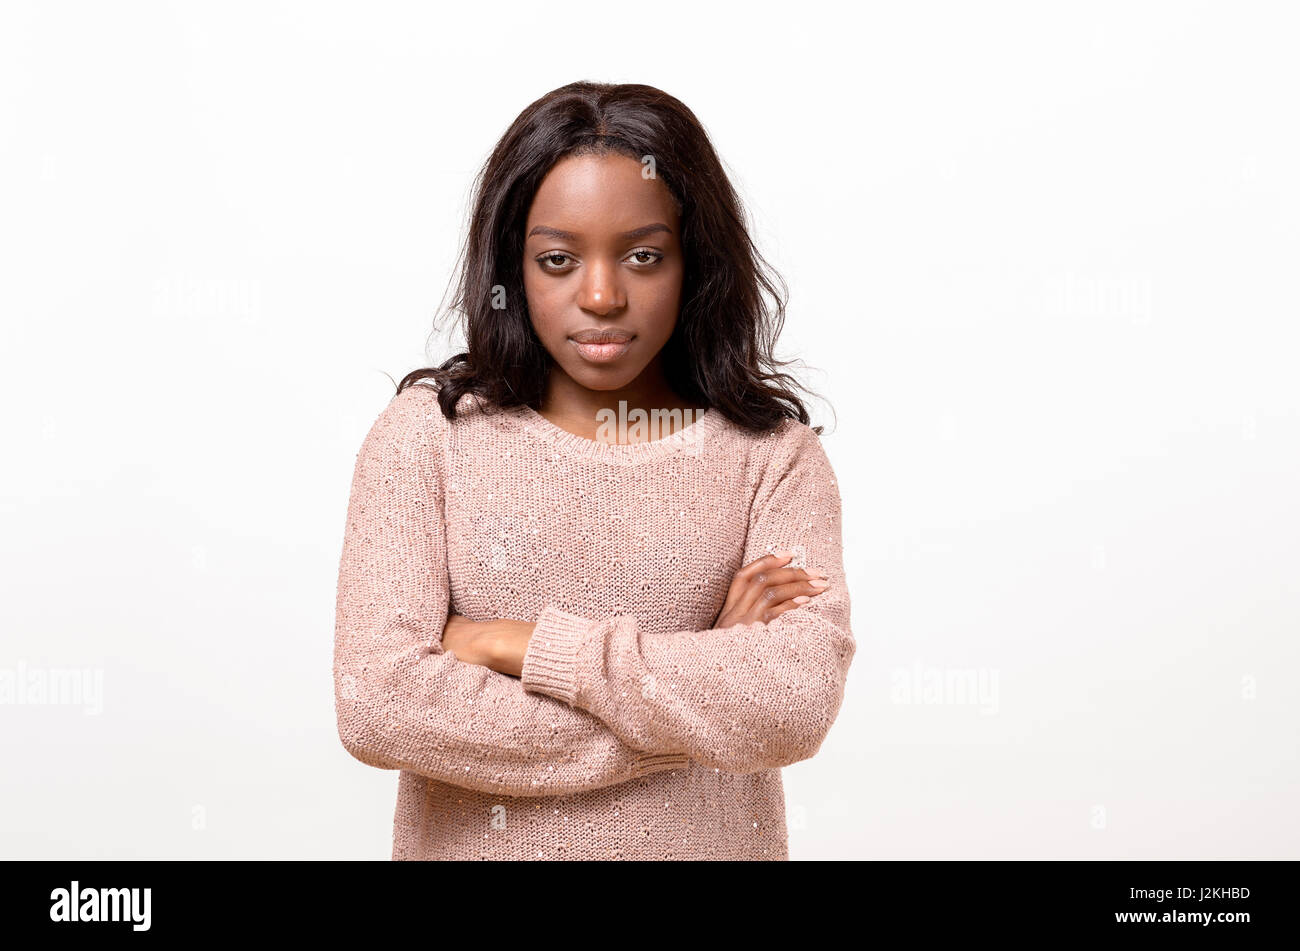 Serious young African American woman standing with folded arms staring at the camera with a calm emotionless expression isolated on white Stock Photo